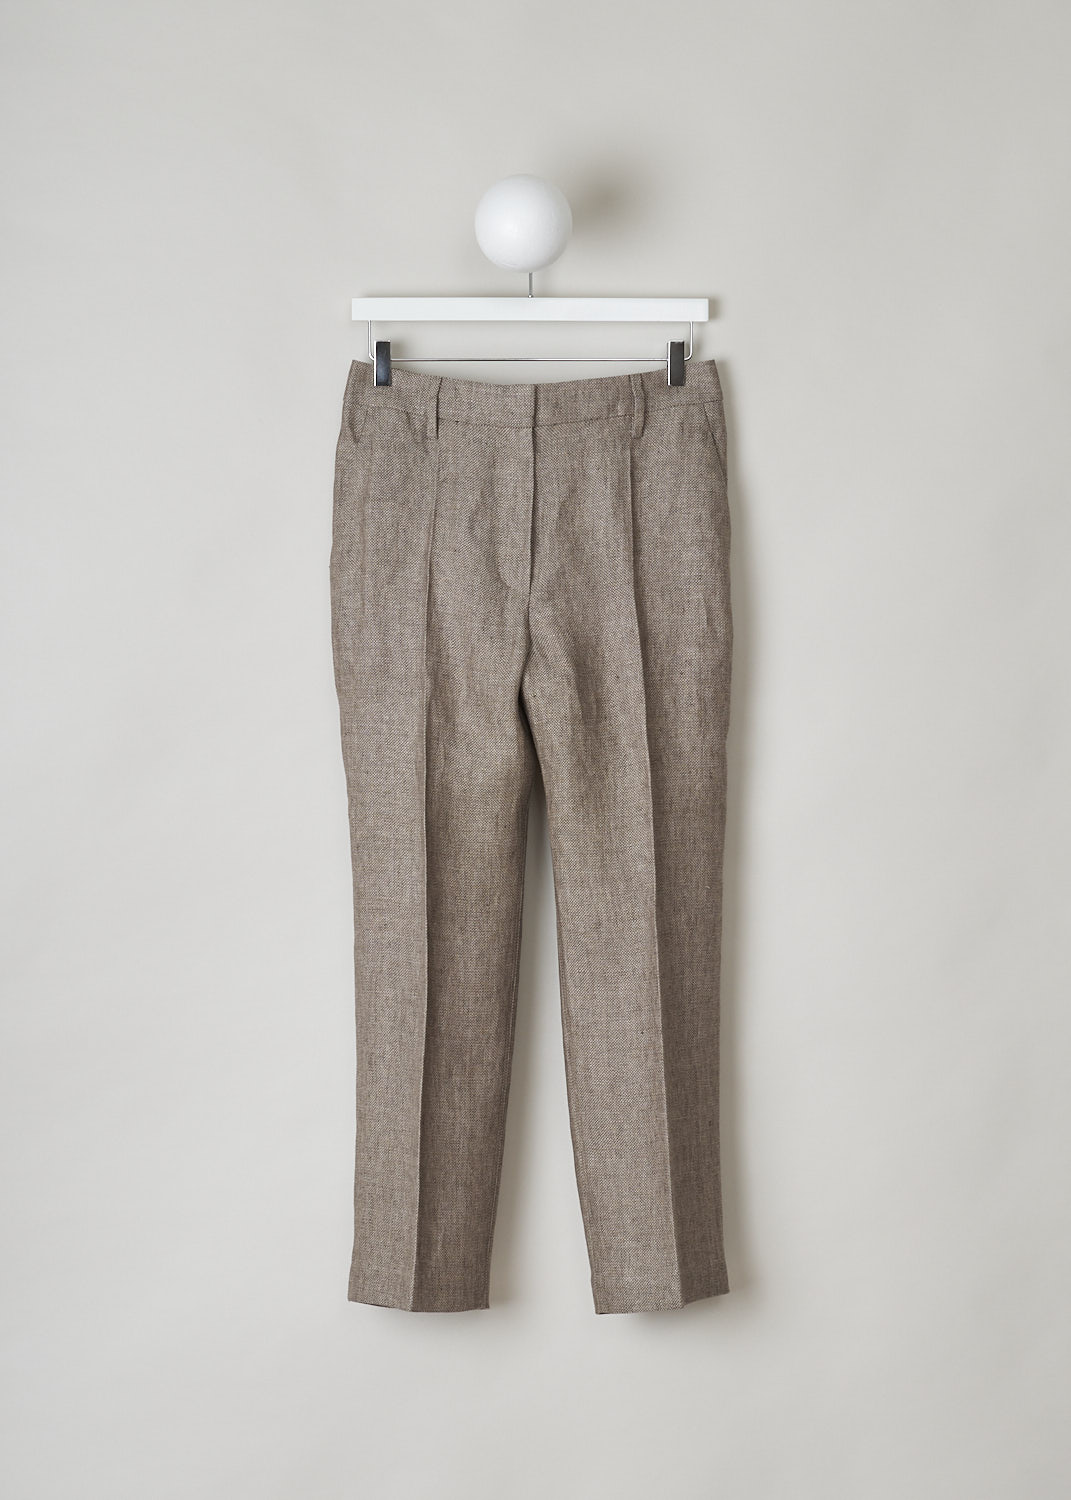 BRUNELLO CUCINELLI, BROWN LINEN PANTS, MH199P7957_C001, Beige, Brown, Front, These brown linen pants have a waistband with belt loops. A concealed hook and zipper function as the closure option. The straight pant legs have pressed centre creases. The pants have forward slanted in the front and welt pockets in the back. 

